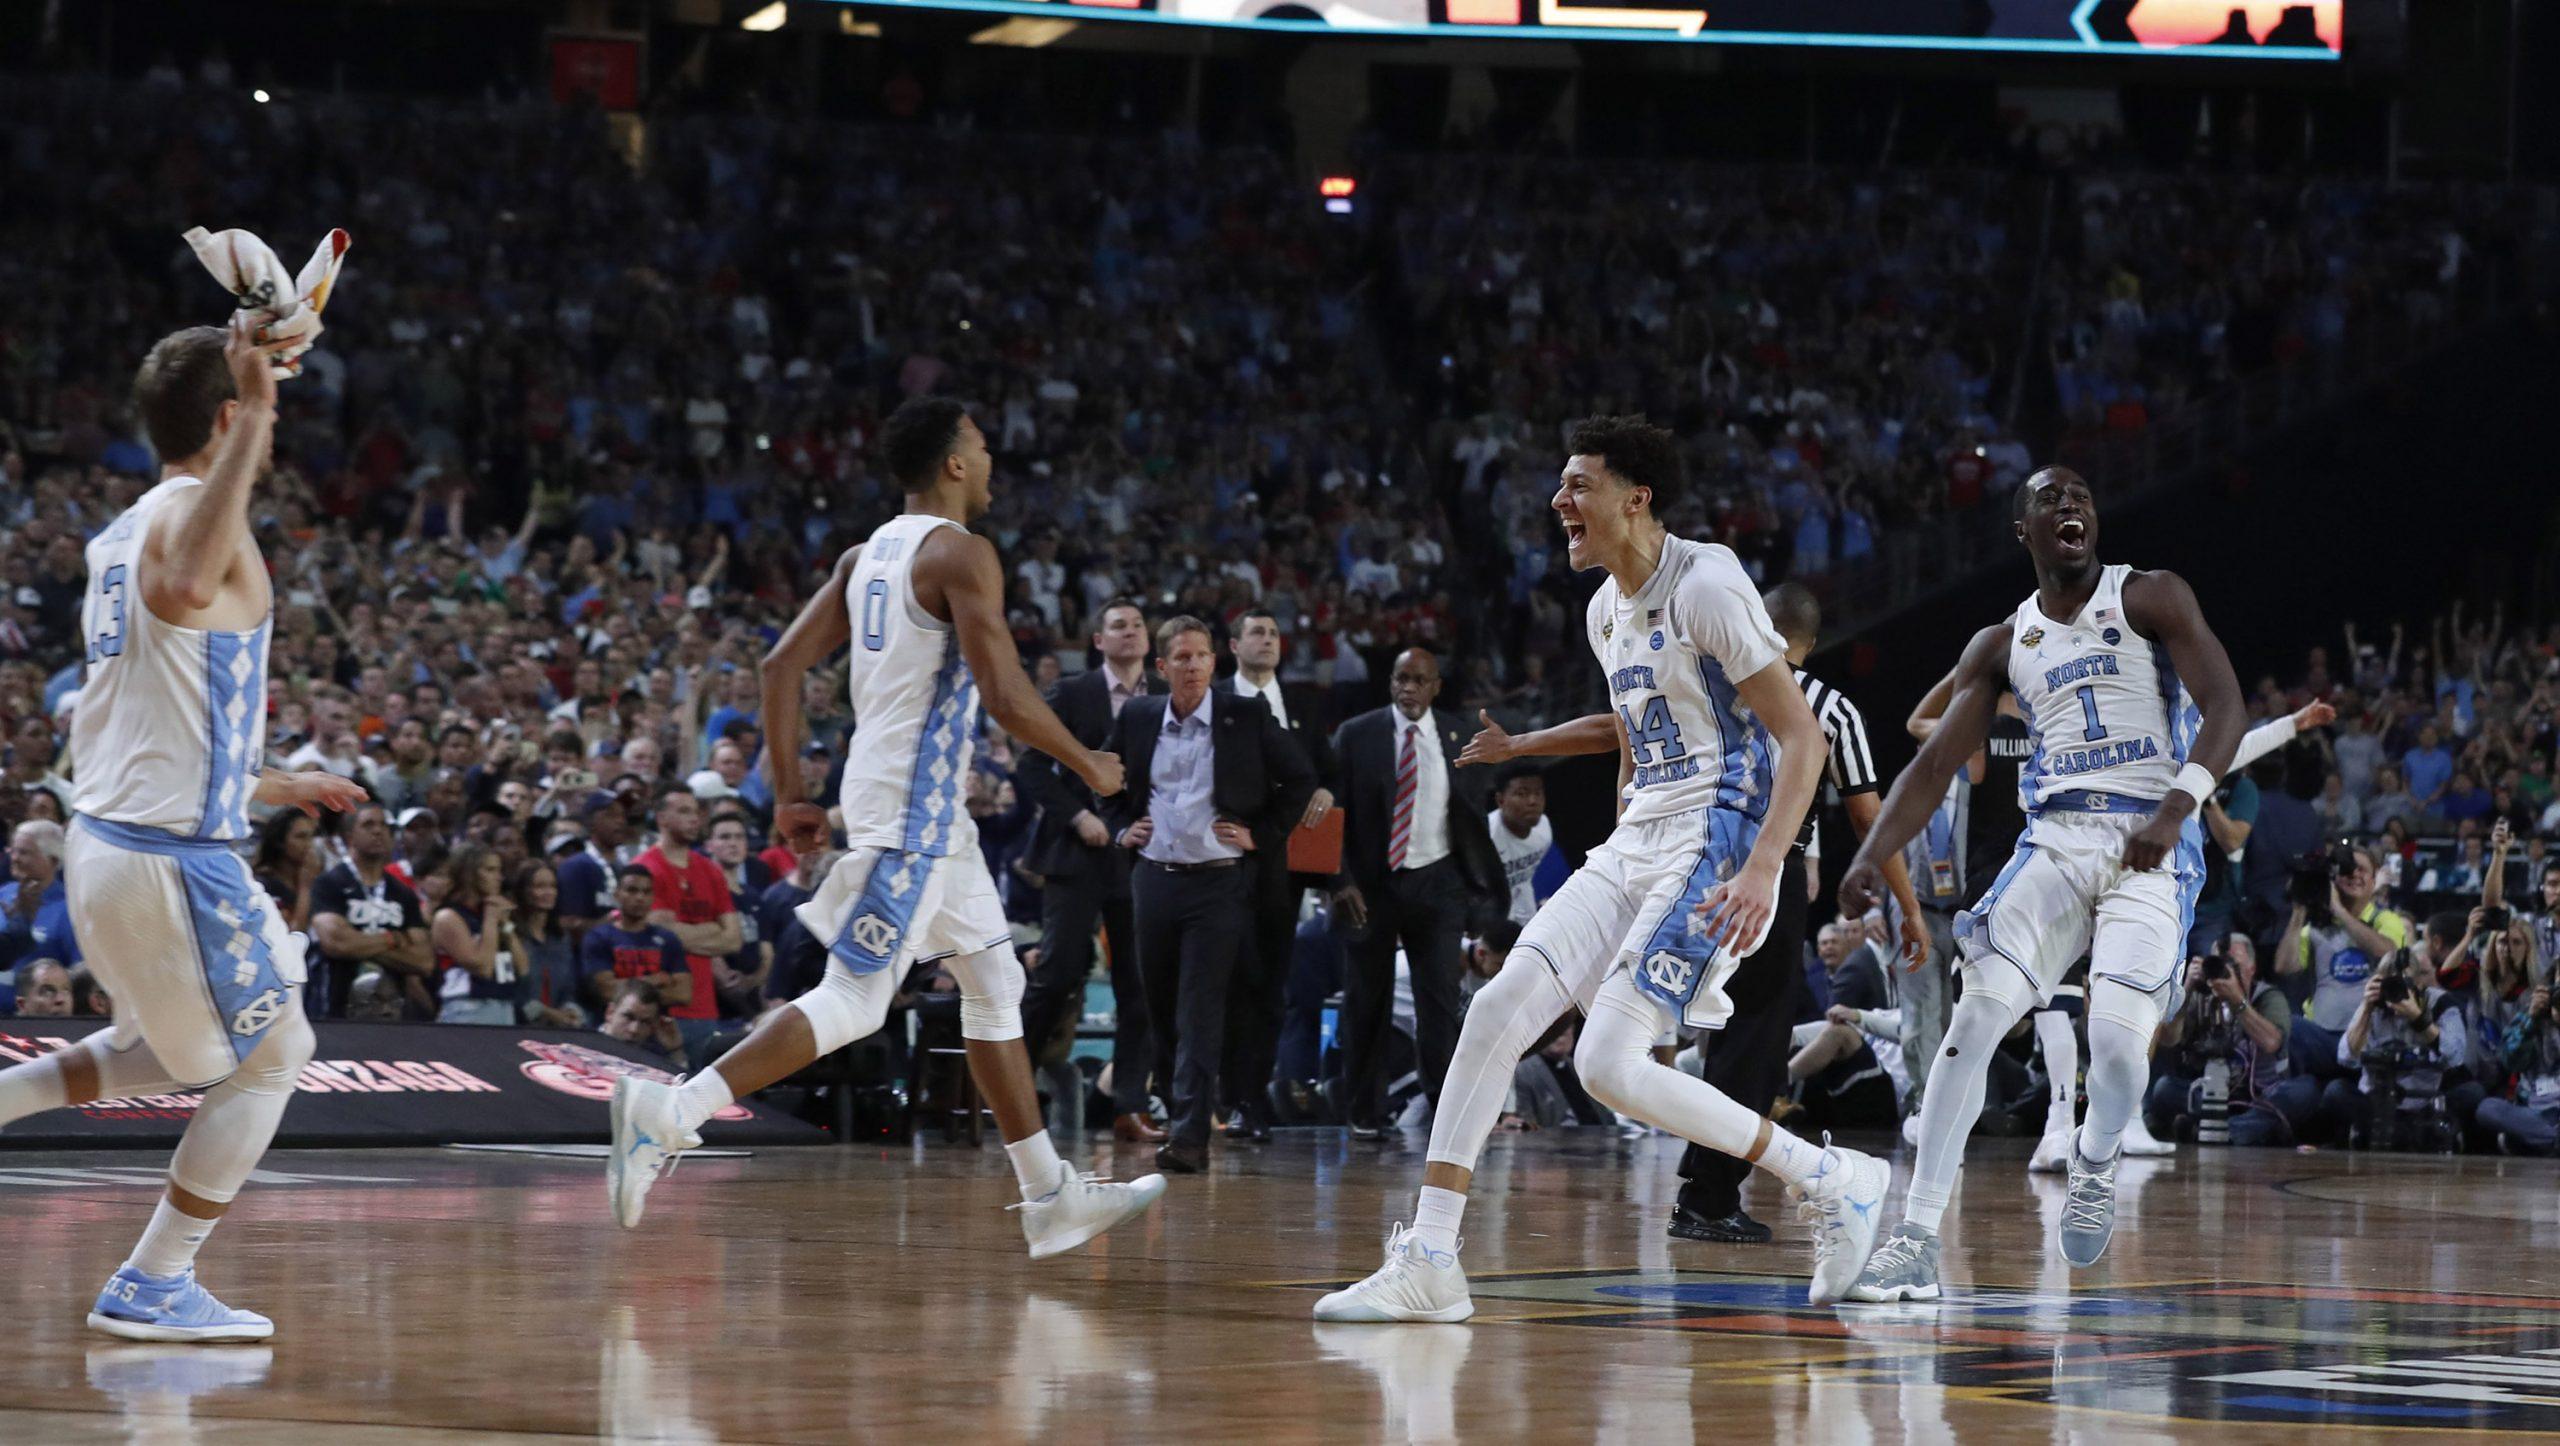 UNC Tar Heels are the champions again